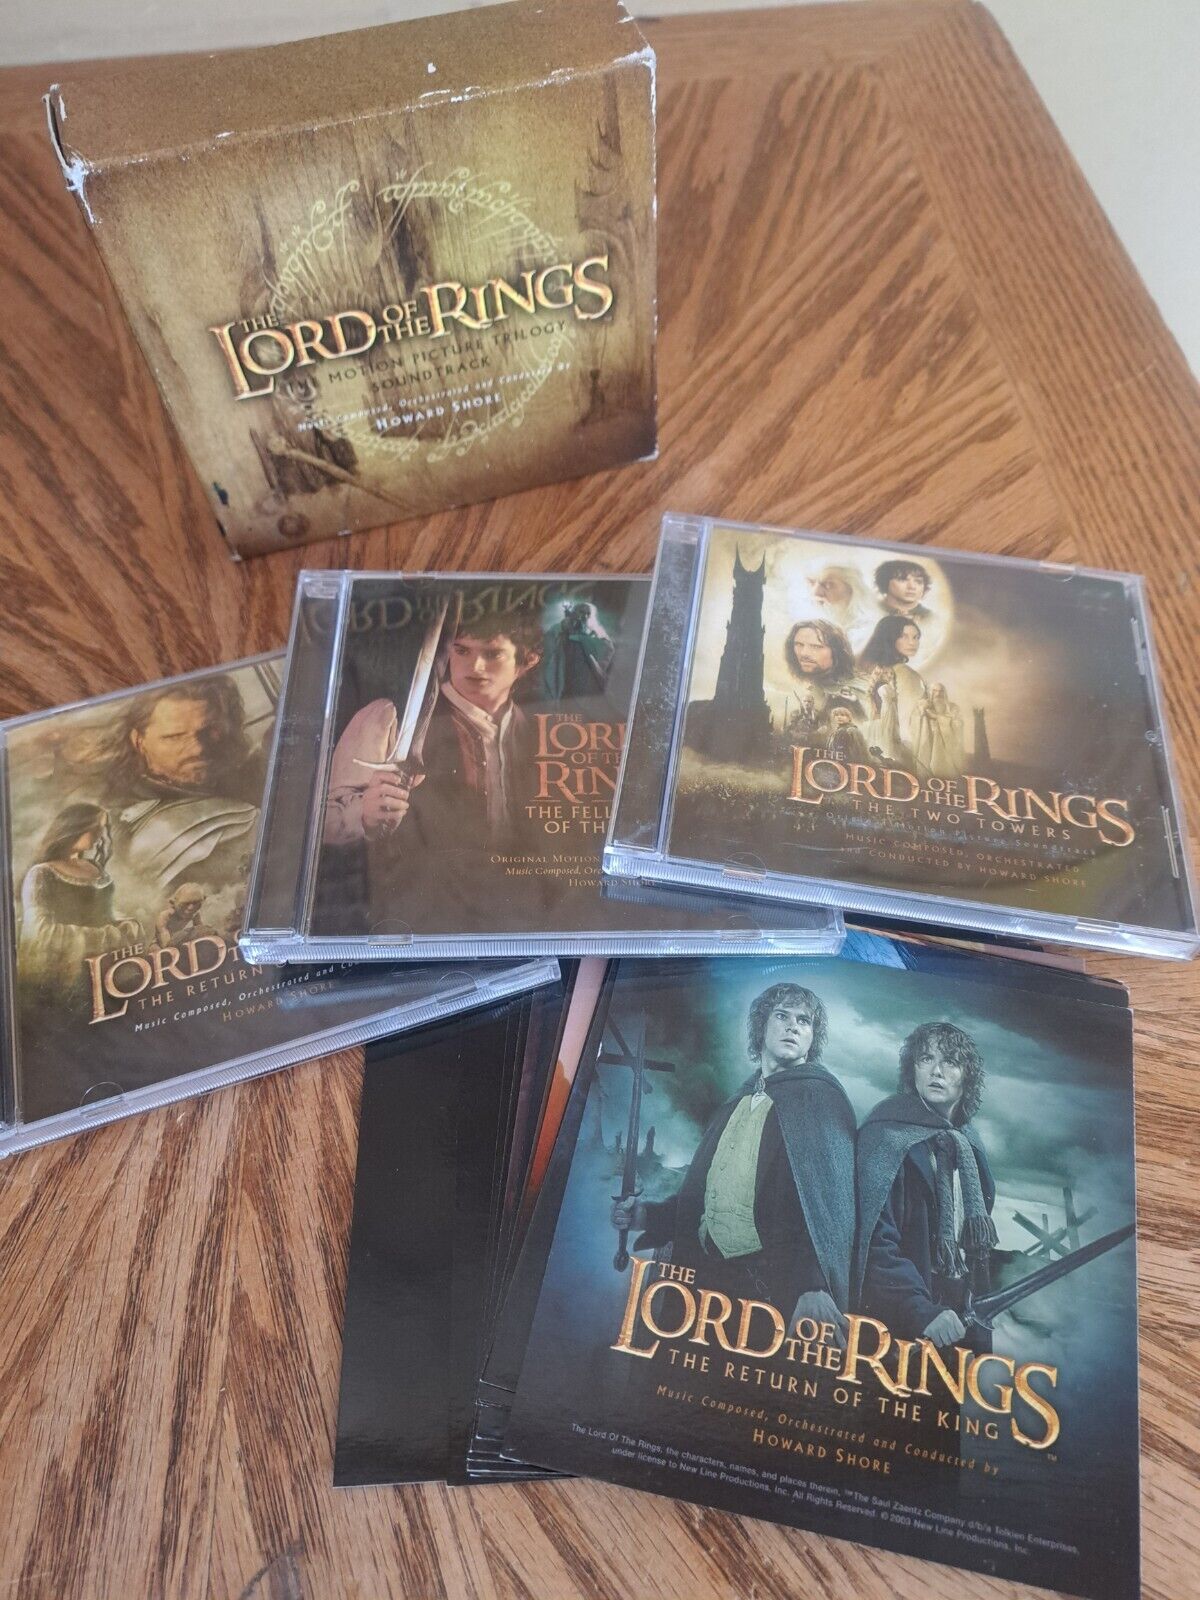 The Lord of the Rings: Complete Trilogy Motion Picture Soundtrack - CDs